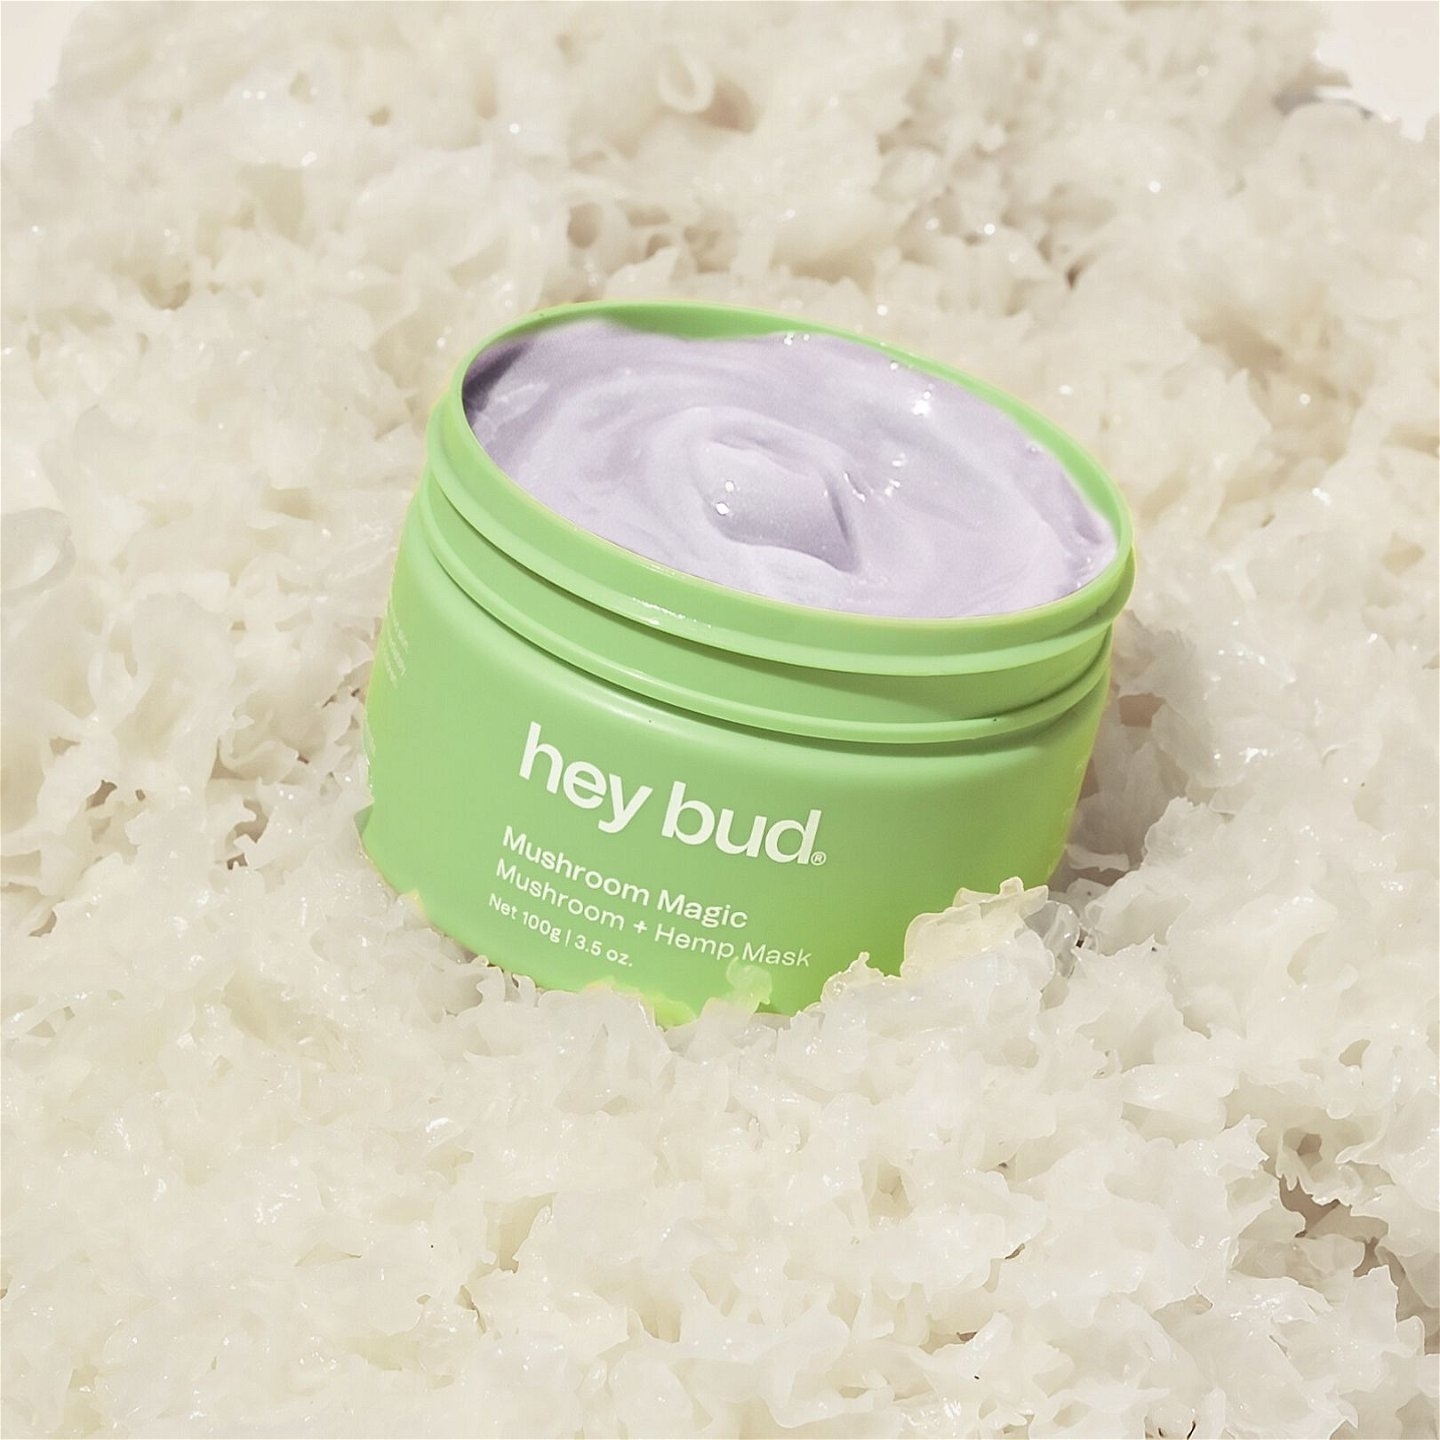 Hey Bud skincare product container open displaying mask; surrounded by textured white material